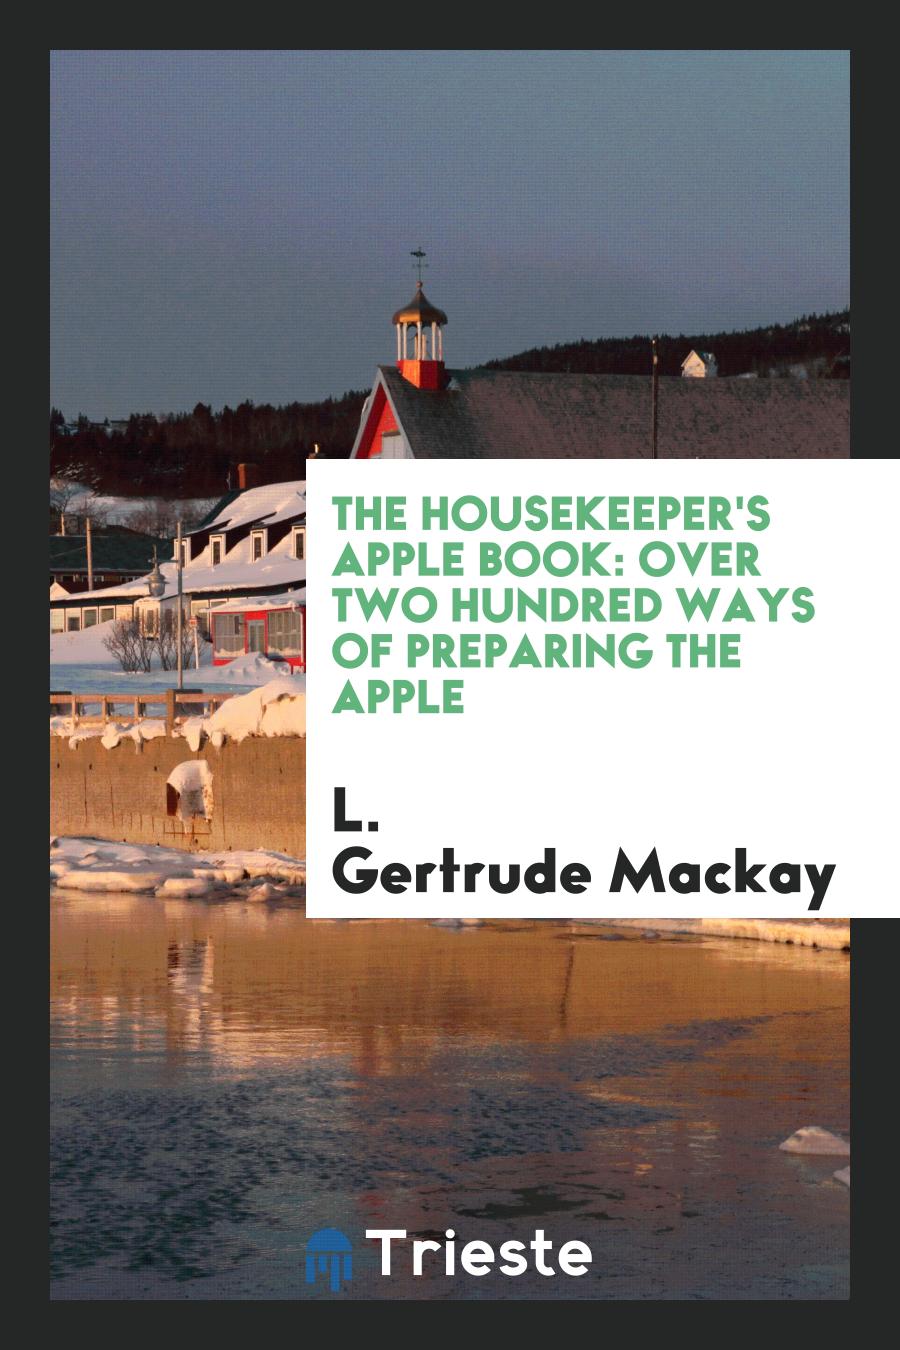 The Housekeeper's Apple Book: Over Two Hundred Ways of Preparing the Apple